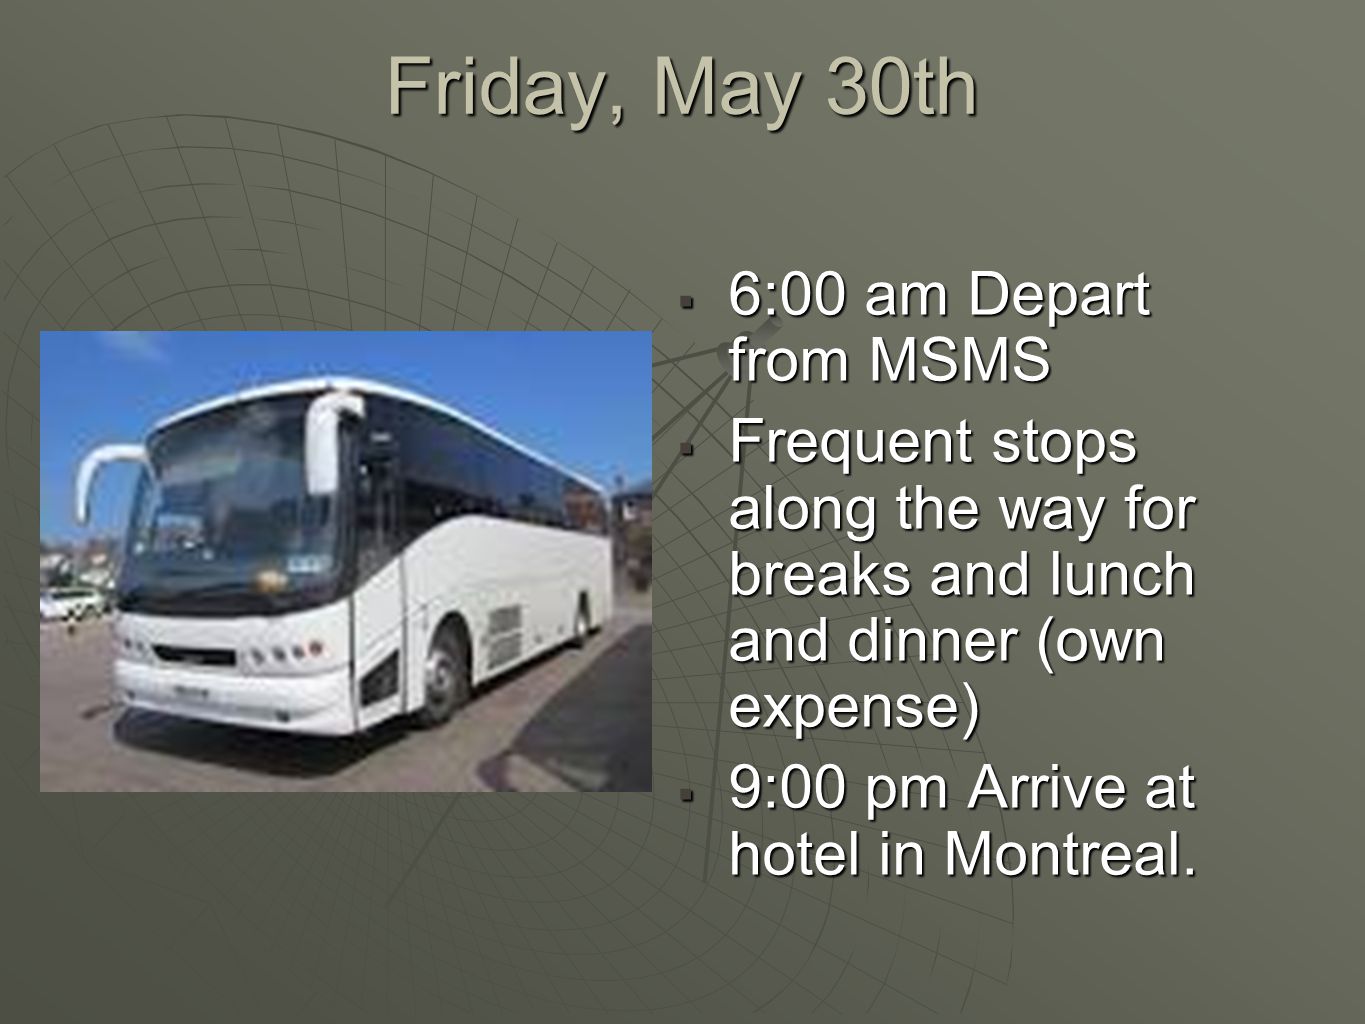 Friday, May 30th  6:00 am Depart from MSMS  Frequent stops along the way for breaks and lunch and dinner (own expense)  9:00 pm Arrive at hotel in Montreal.